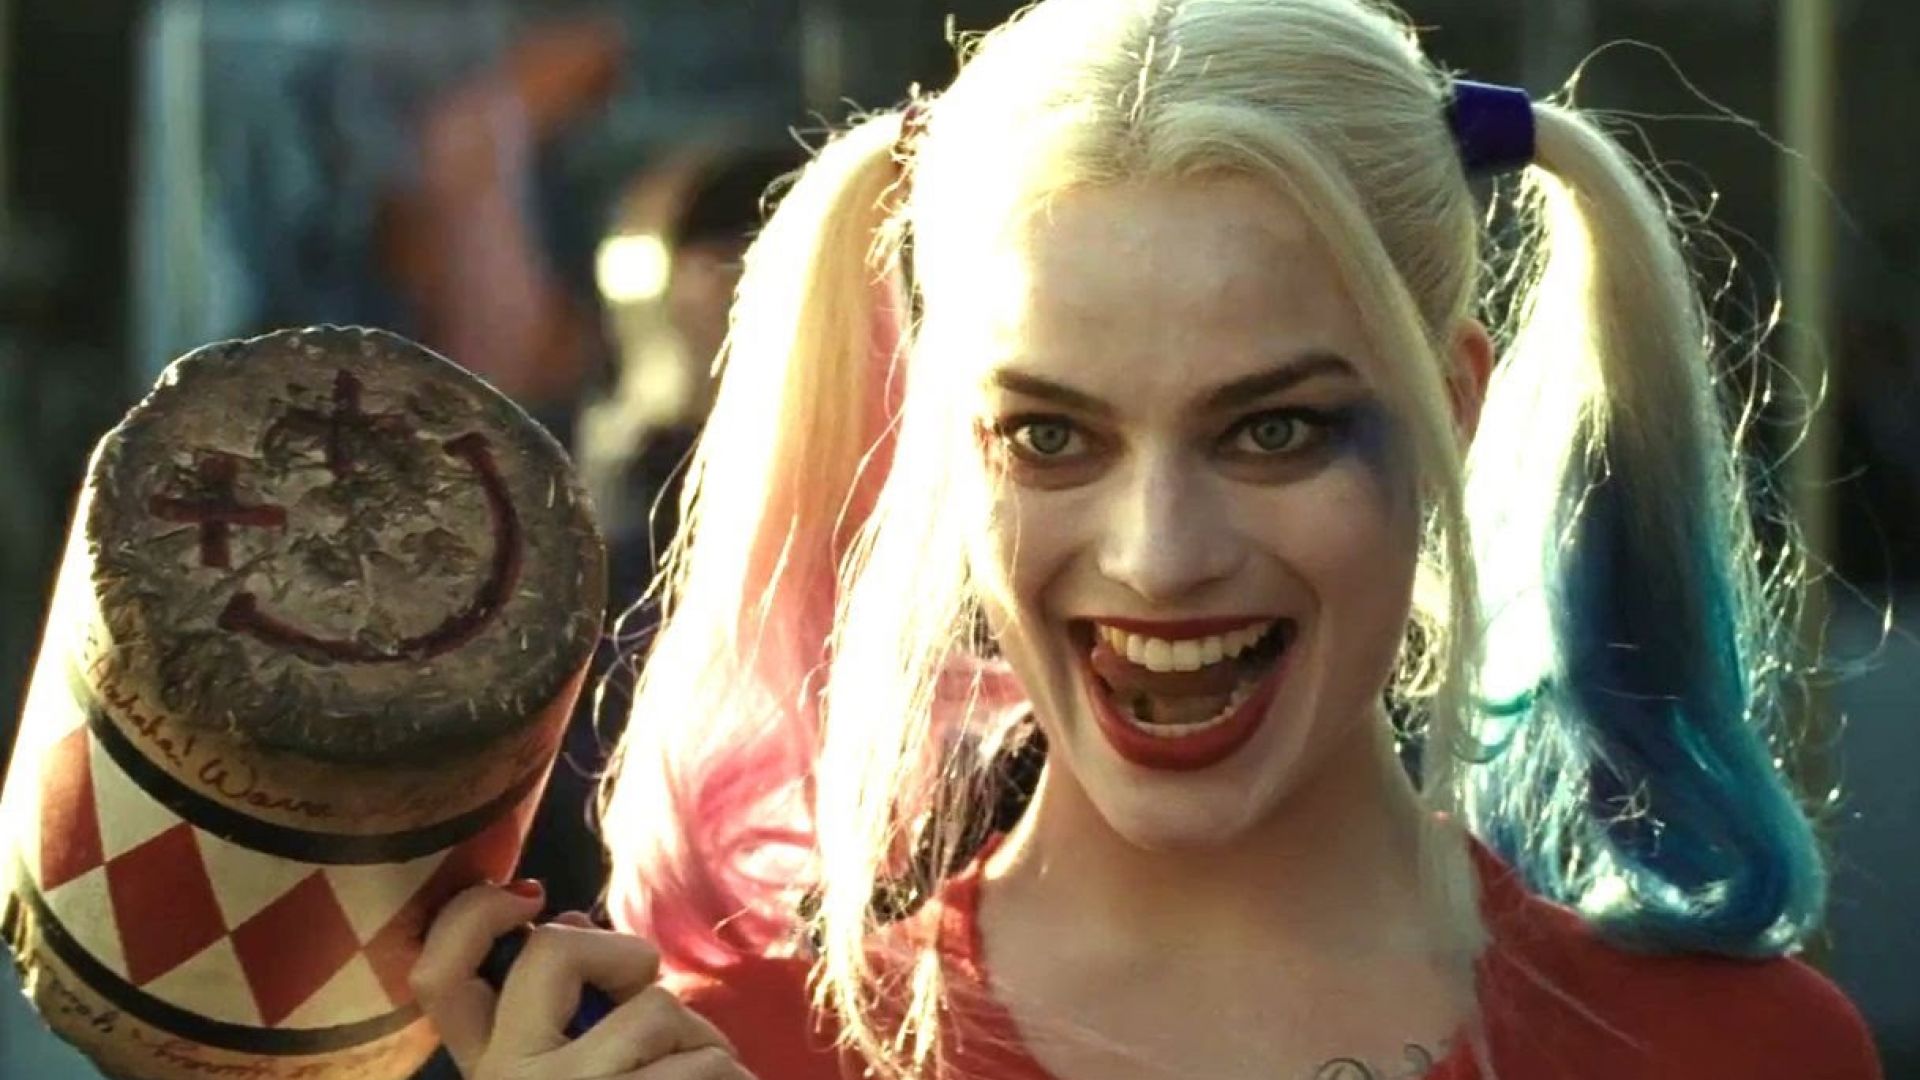 Meet Task Force X in the Newest Trailer for Suicide Squad